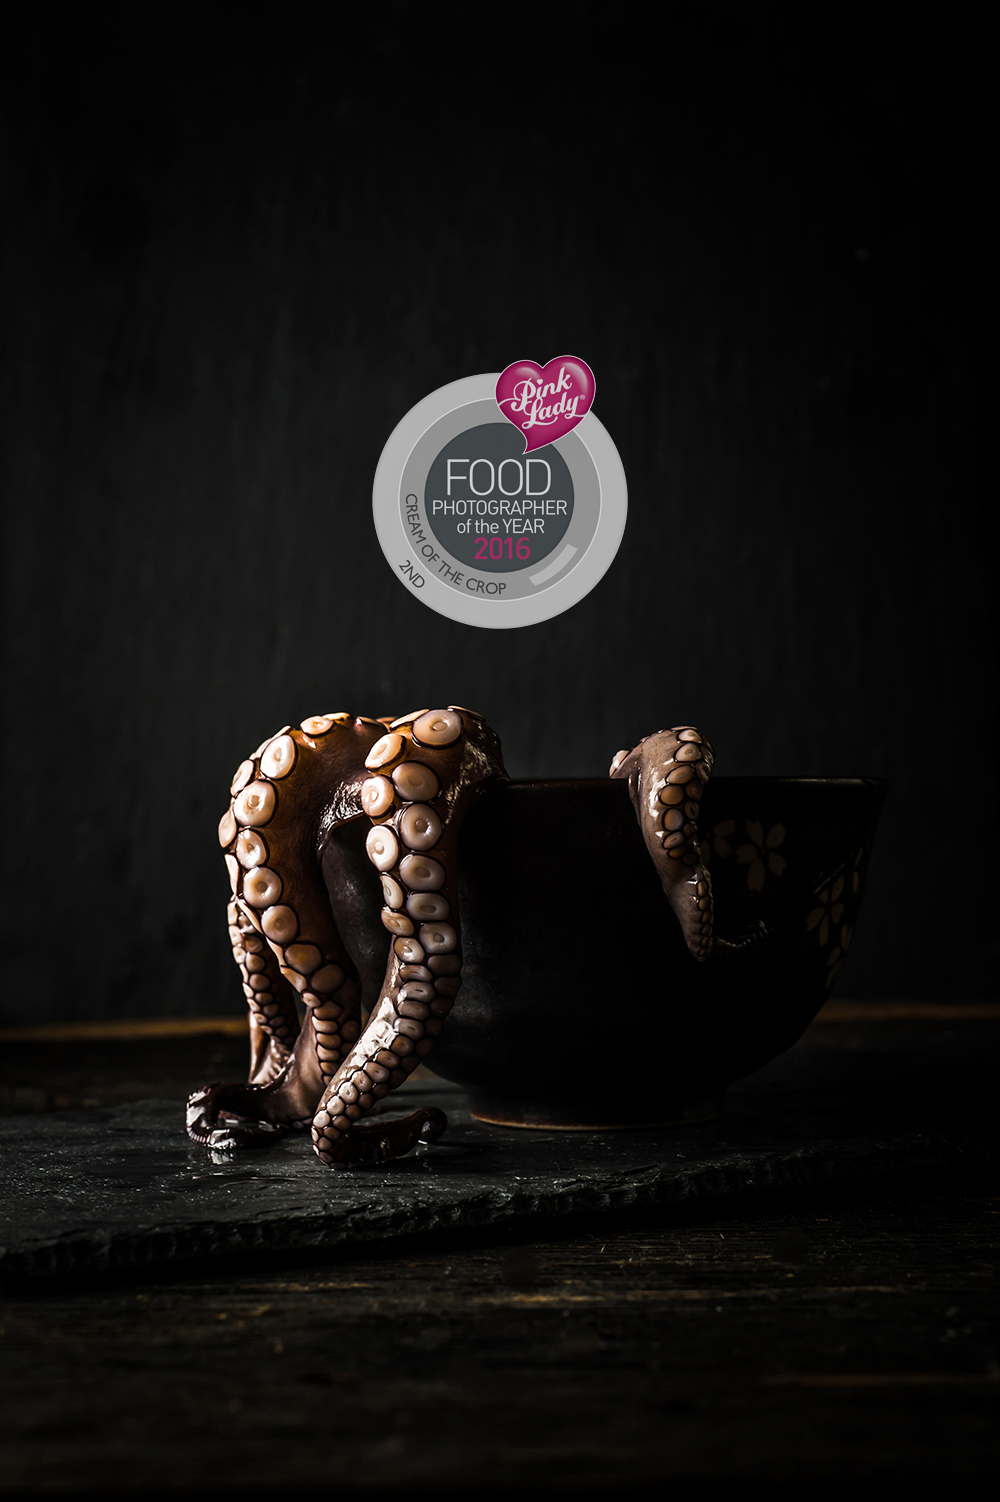 Octopus in a Bowl - Pink Lady Food Photographer of the Year - 2nd Place